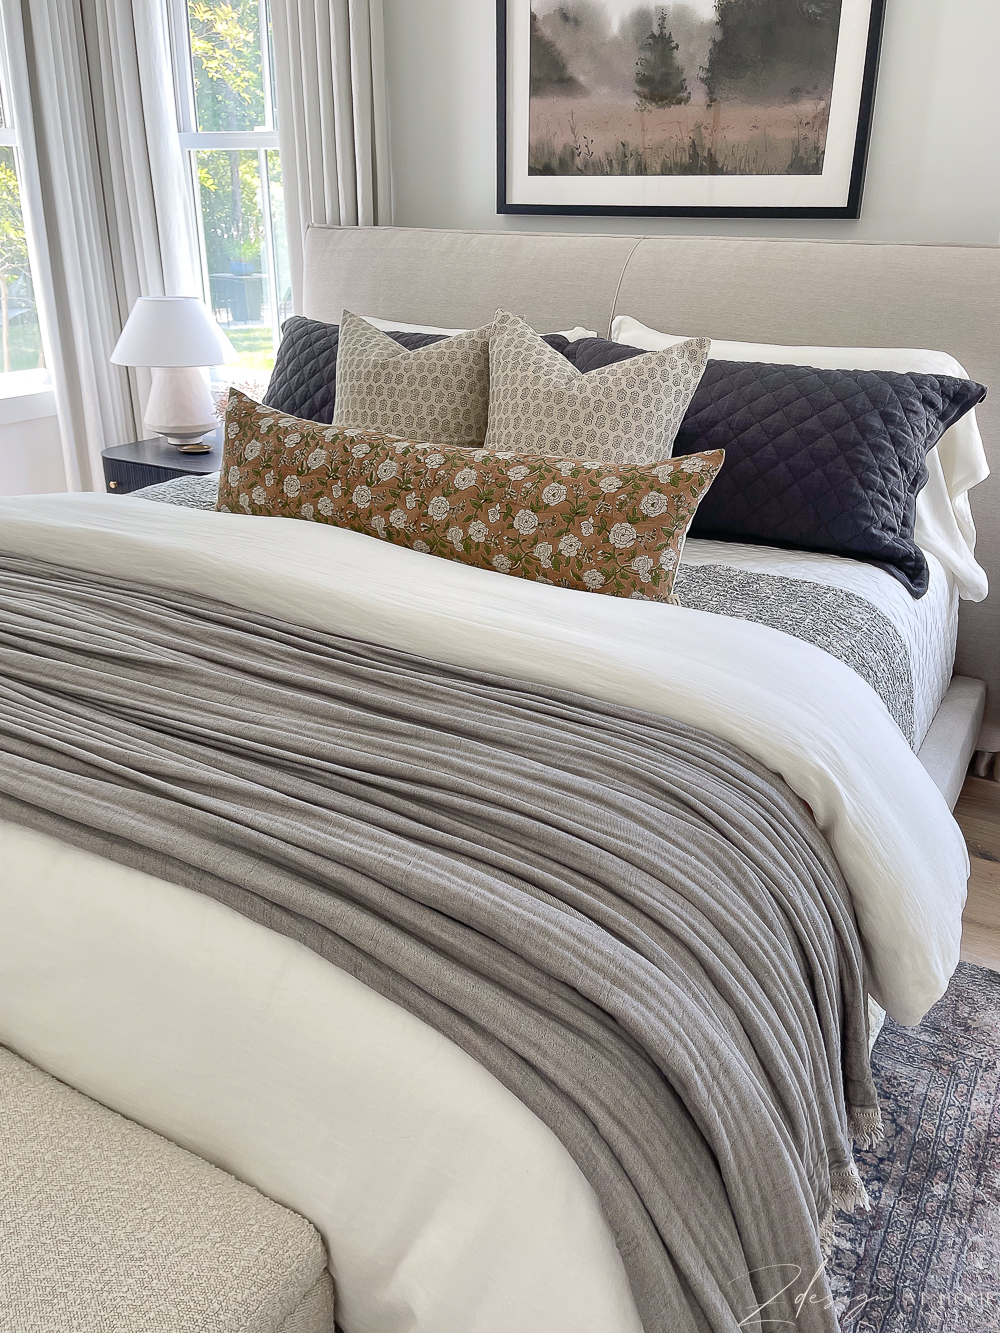 bed layers with decorative floral and block pillows 